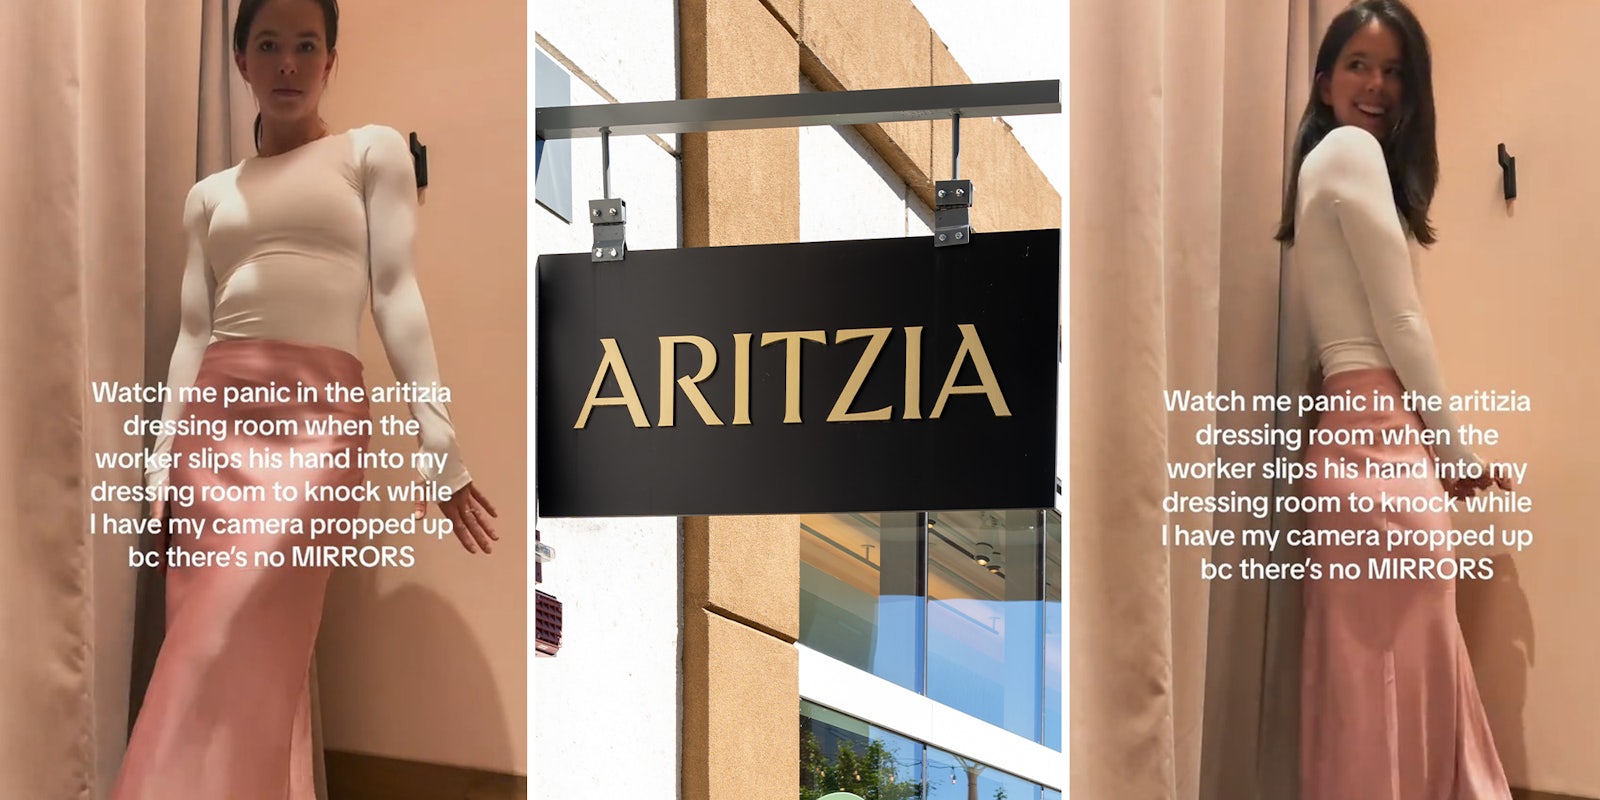 Aritzia customer says worker slipped his hand in her dressing room while she was trying on clothes